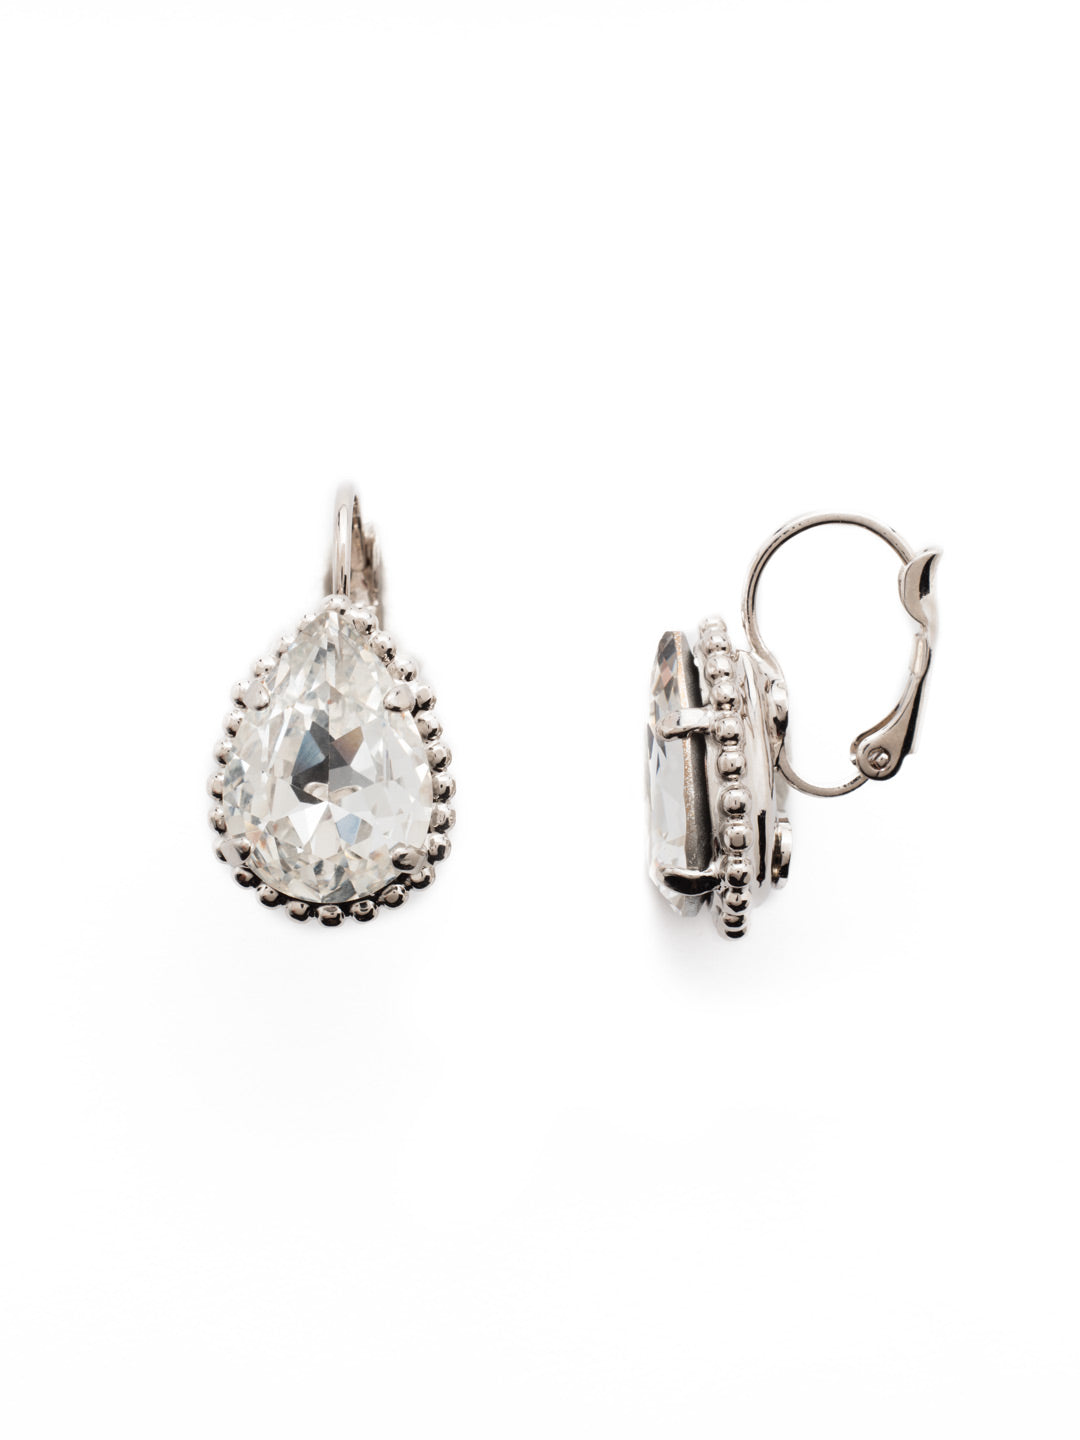 Pear Cut Dangle Earrings - EDA65RHCRY - <p>These french wire earrings feature a beautiful pear stone surrounded by a decorative edged border. From Sorrelli's Crystal collection in our Palladium Silver-tone finish.</p>